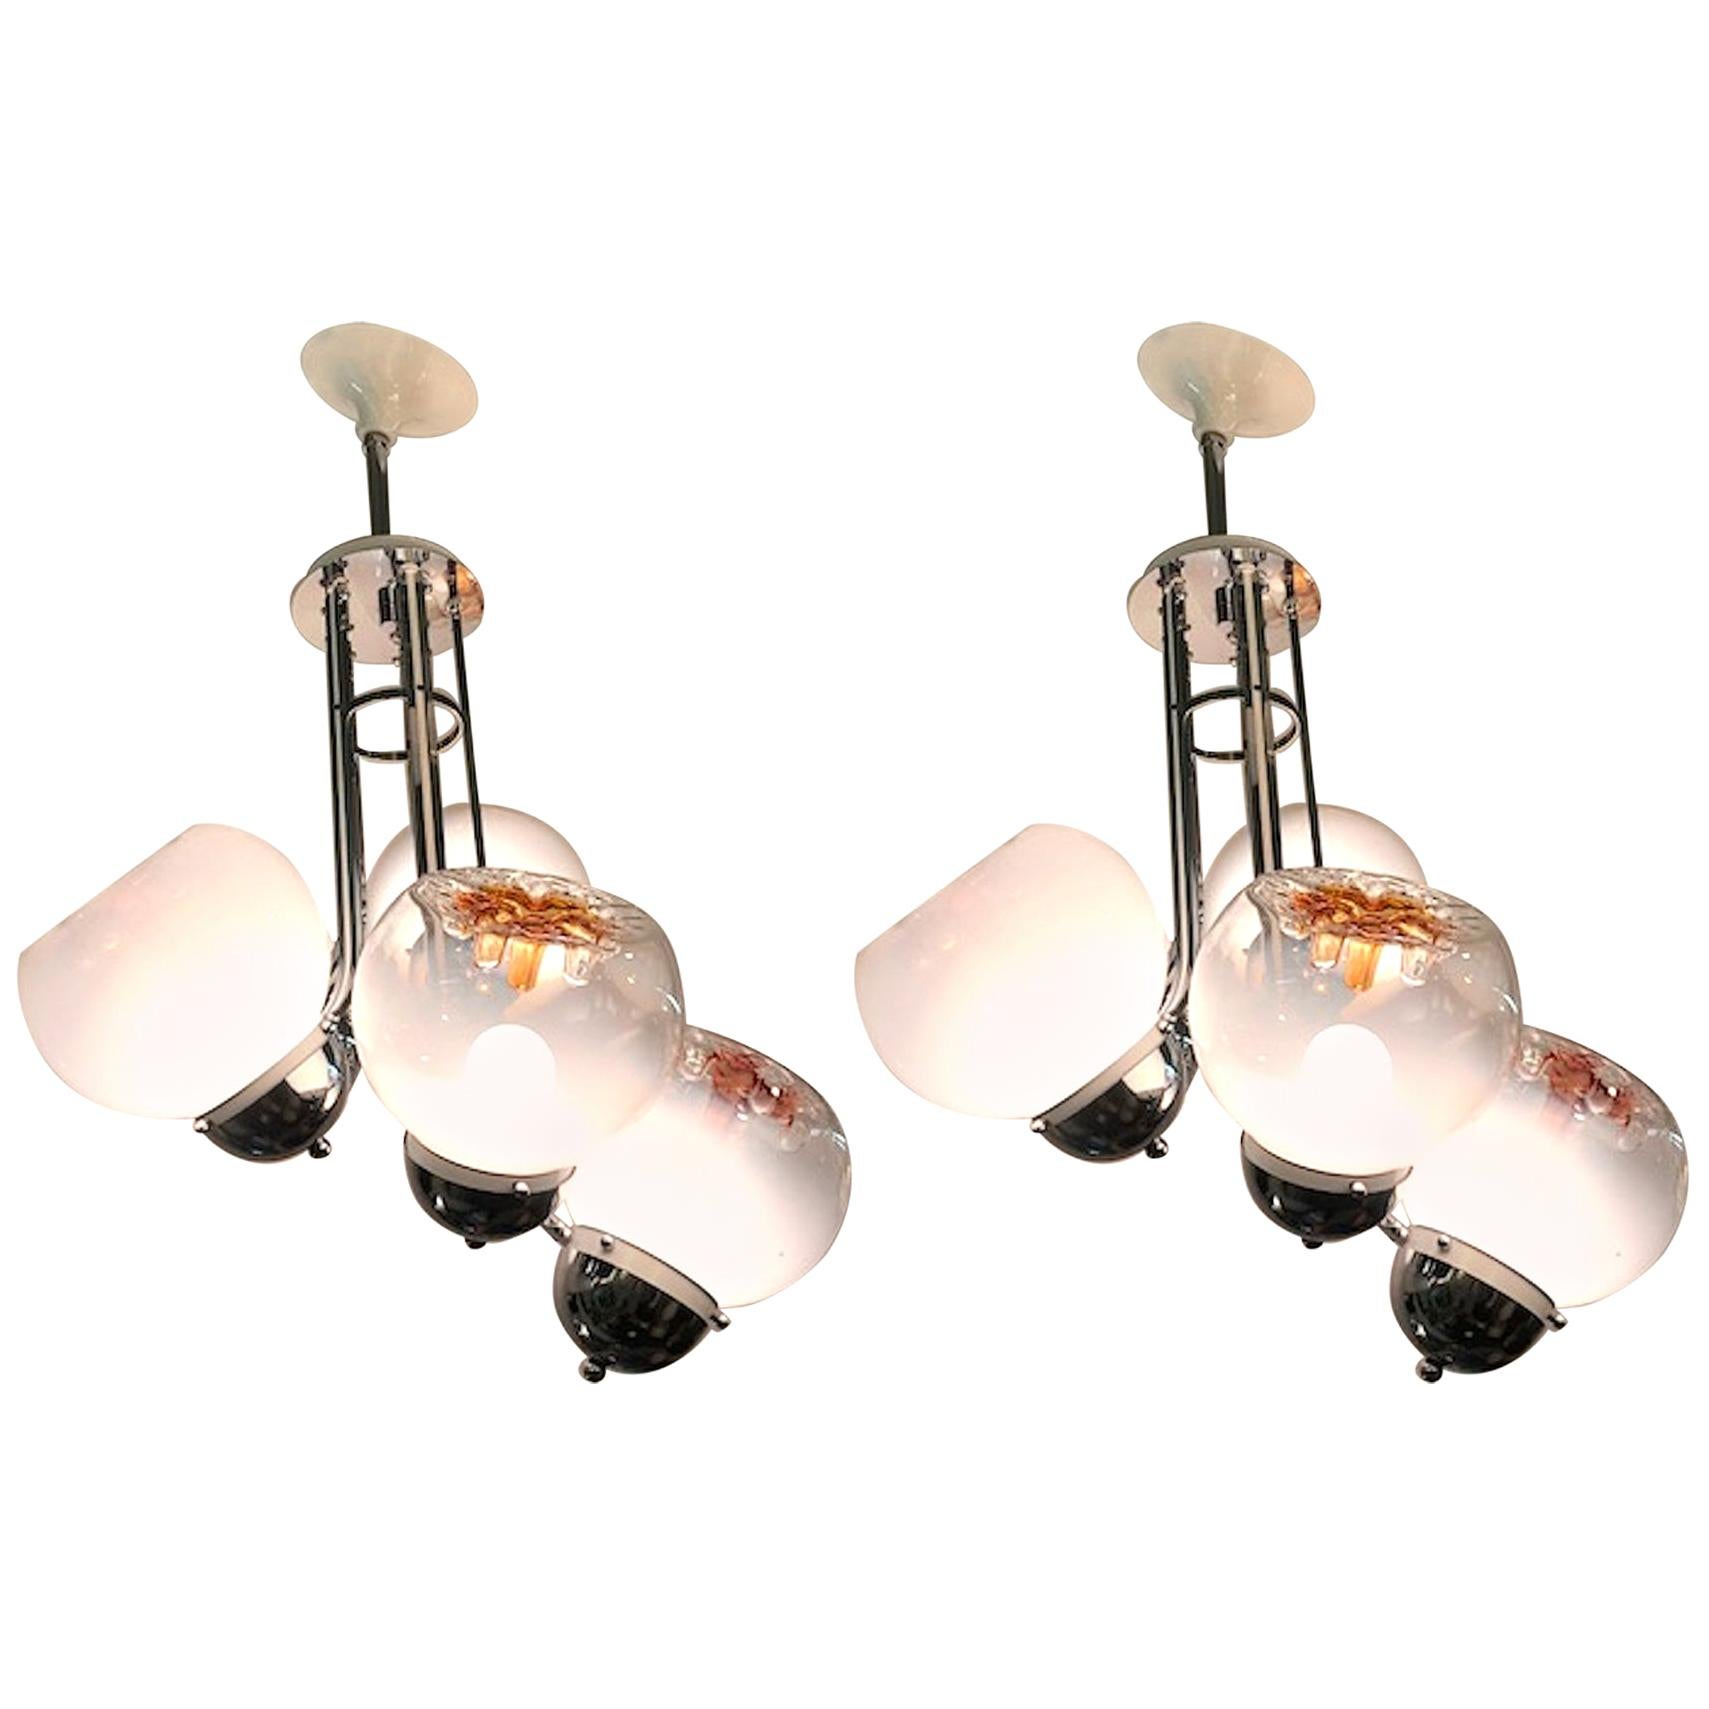 Pair of Italian 1970s Modern Five-Light Sculptural Chandeliers For Sale